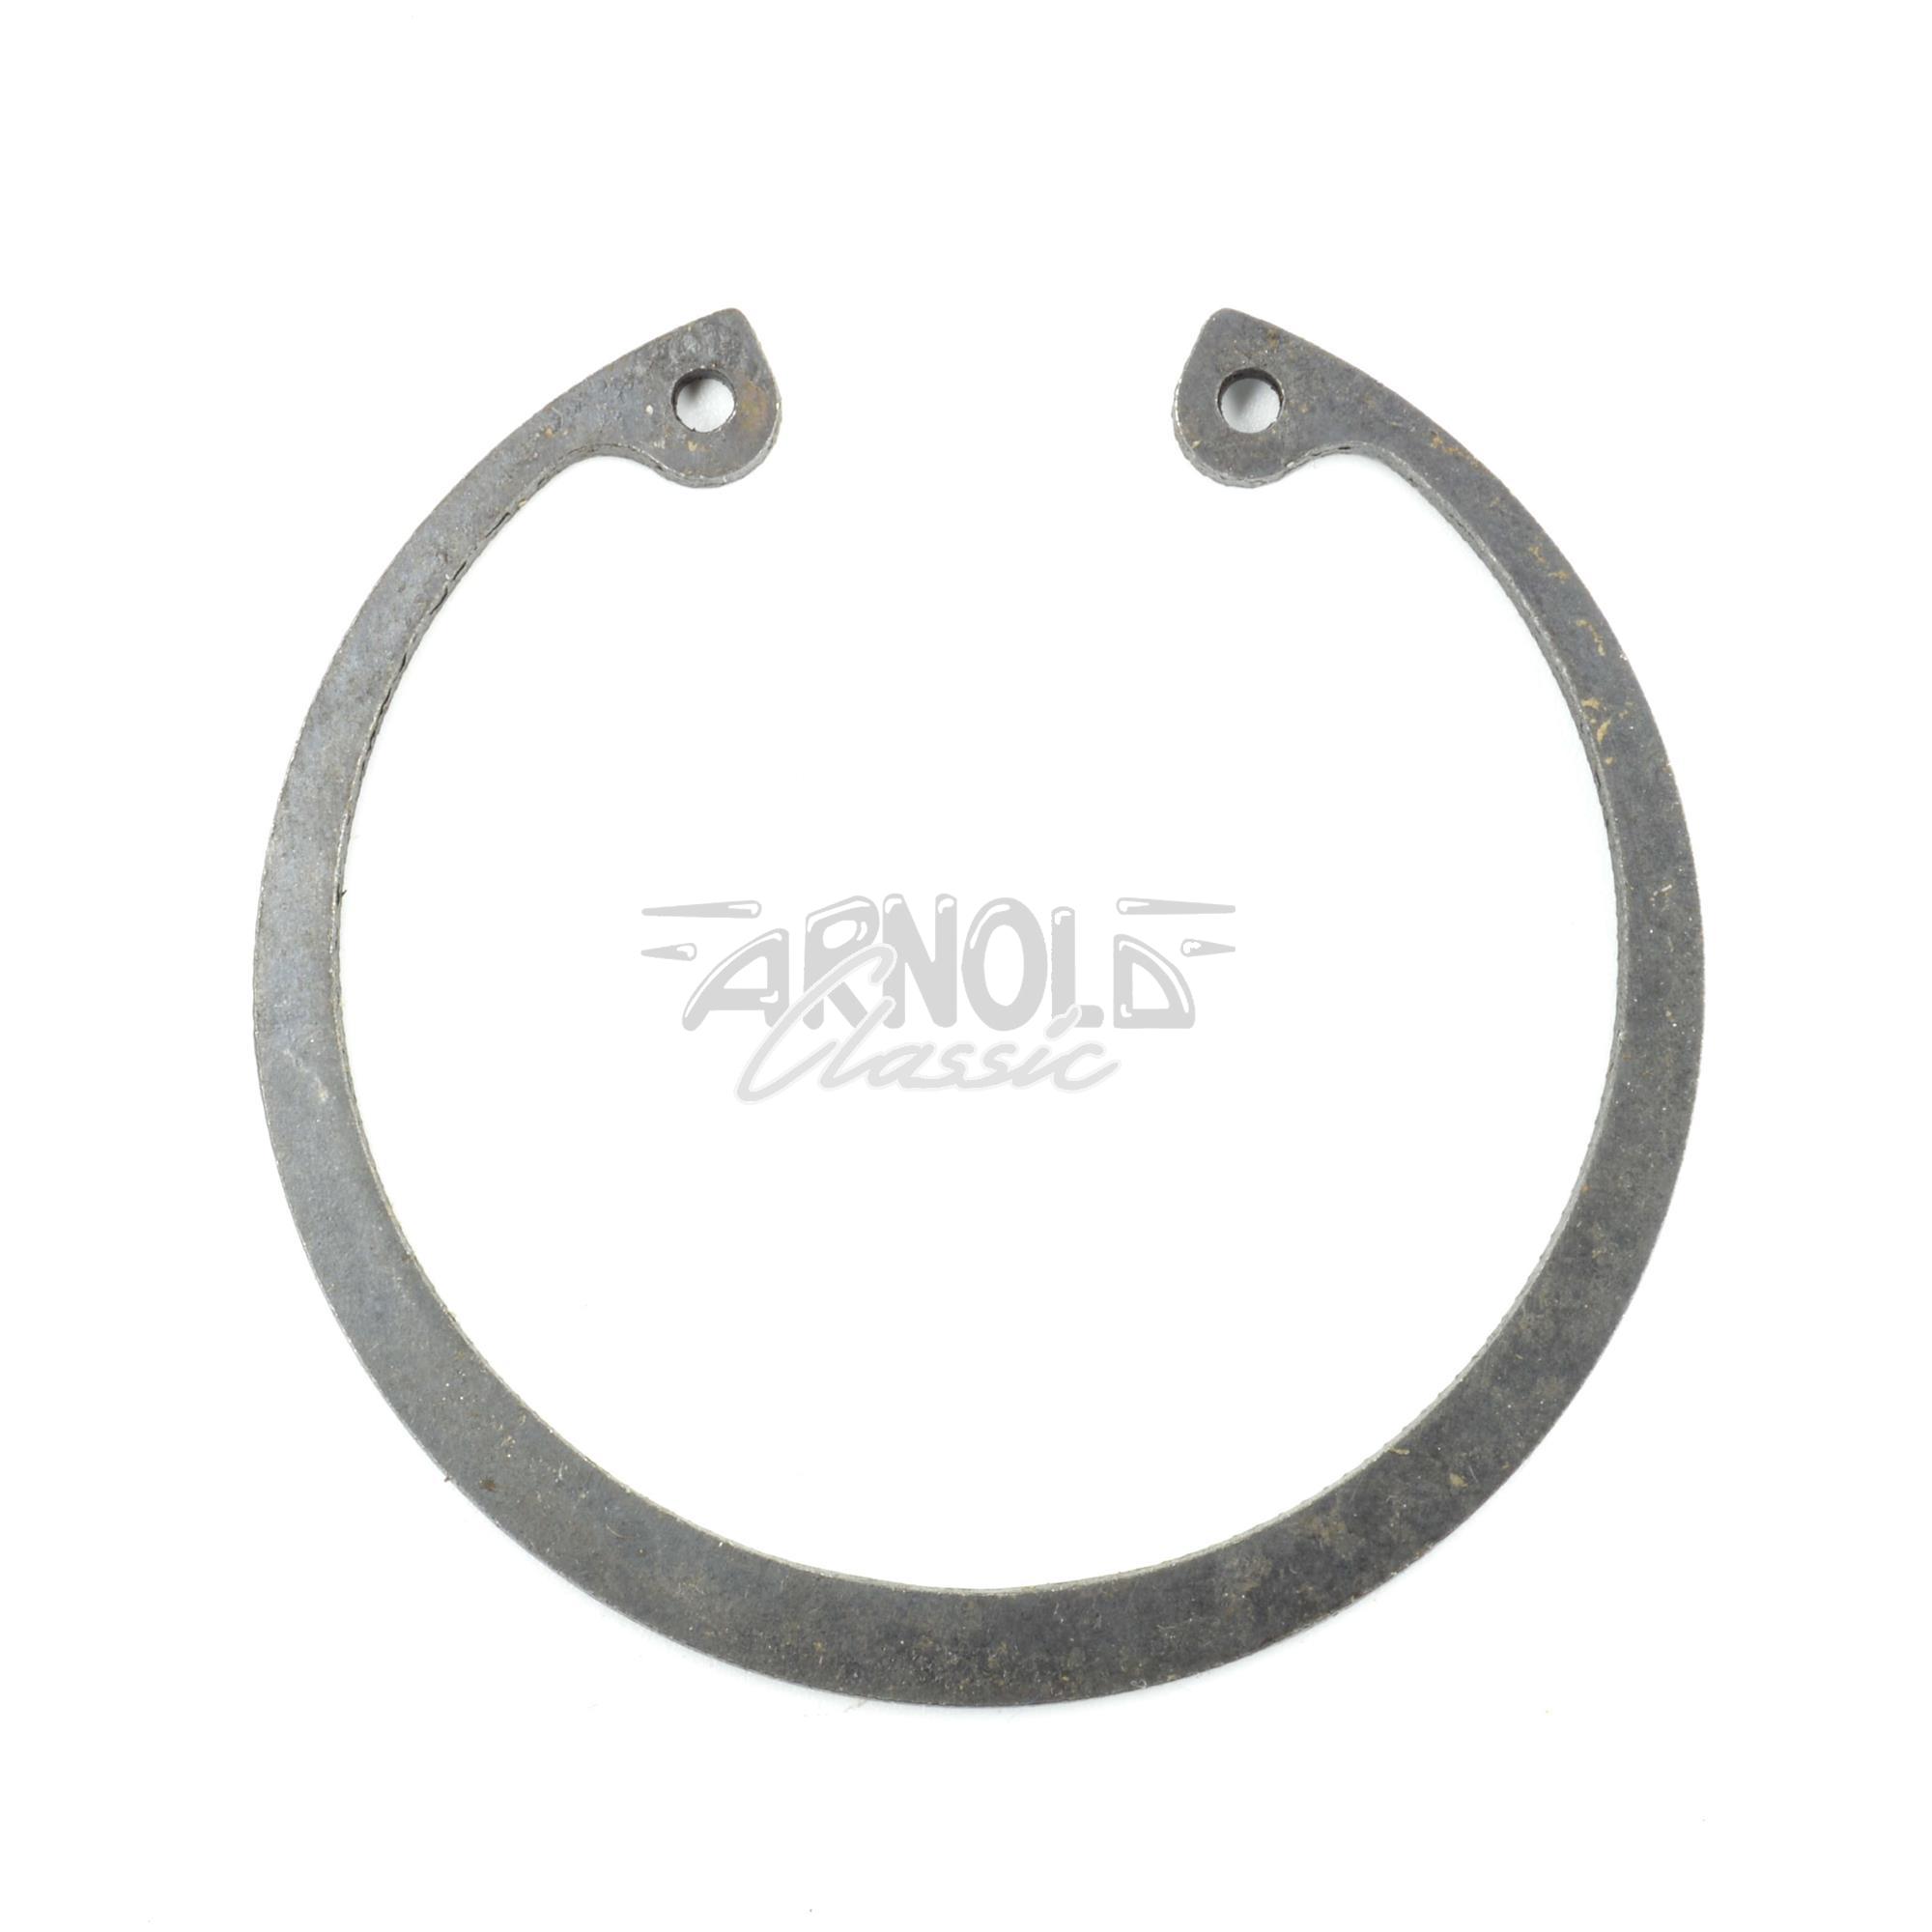 Seeger ring for ball bearing Gummilager Kardanwelle Fiat 124 Spider, Coupé,  Berlina, 131, 1500 Cabrio